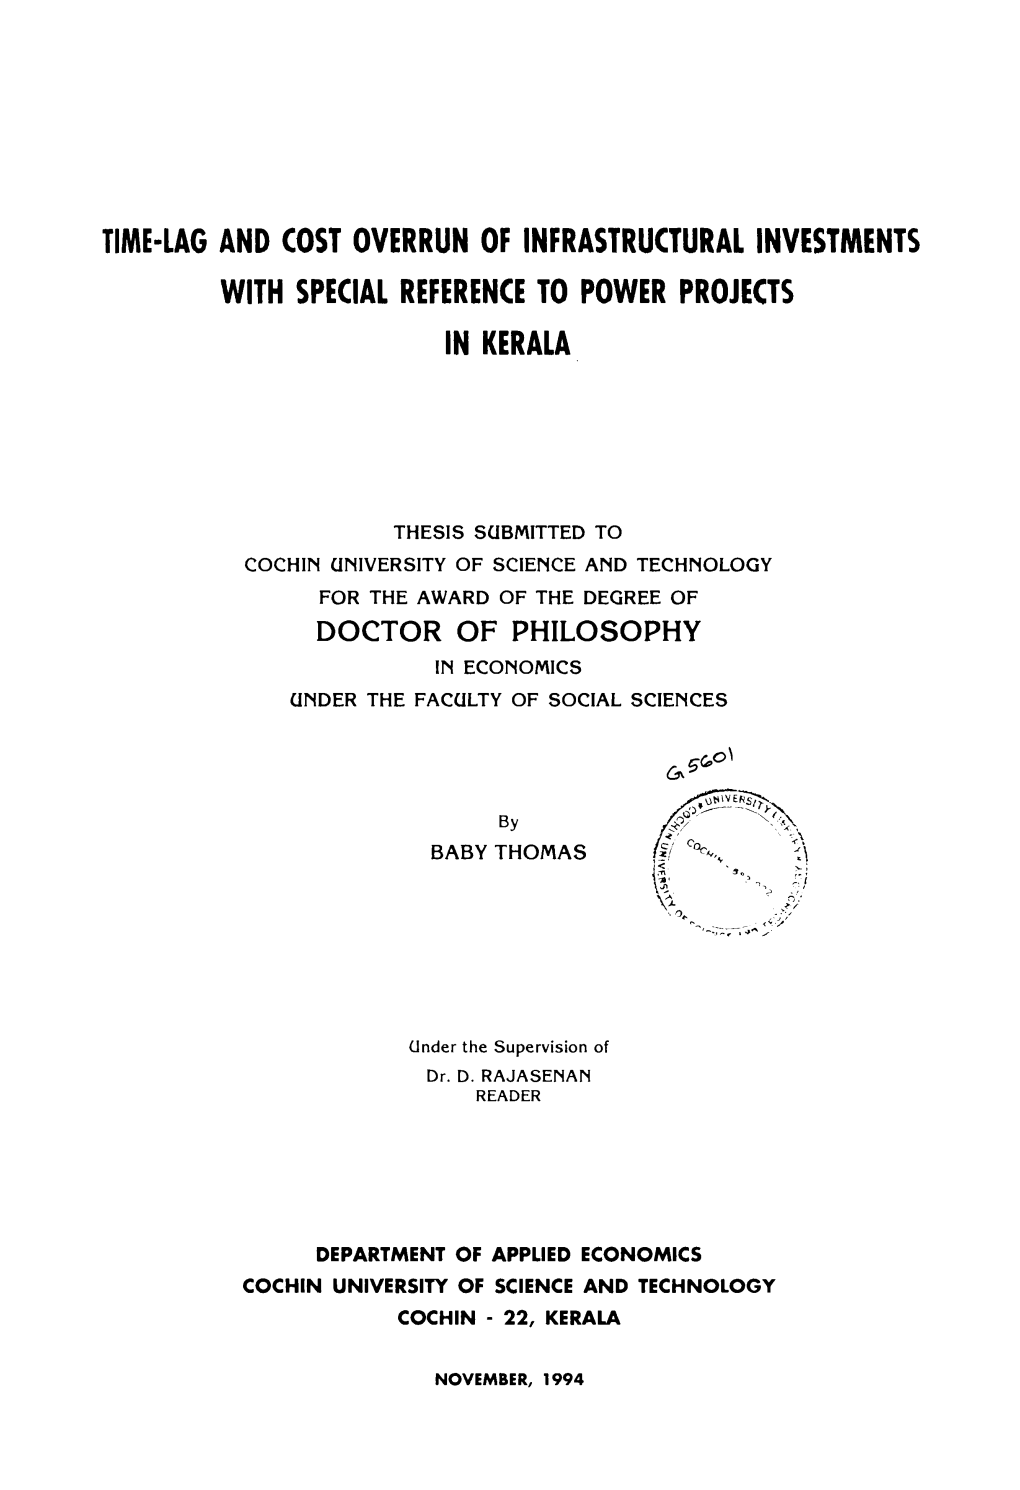 Time-Lag and Cost Overrun of Infrastructural Investments with Special Reference to Power Projects in Kerala